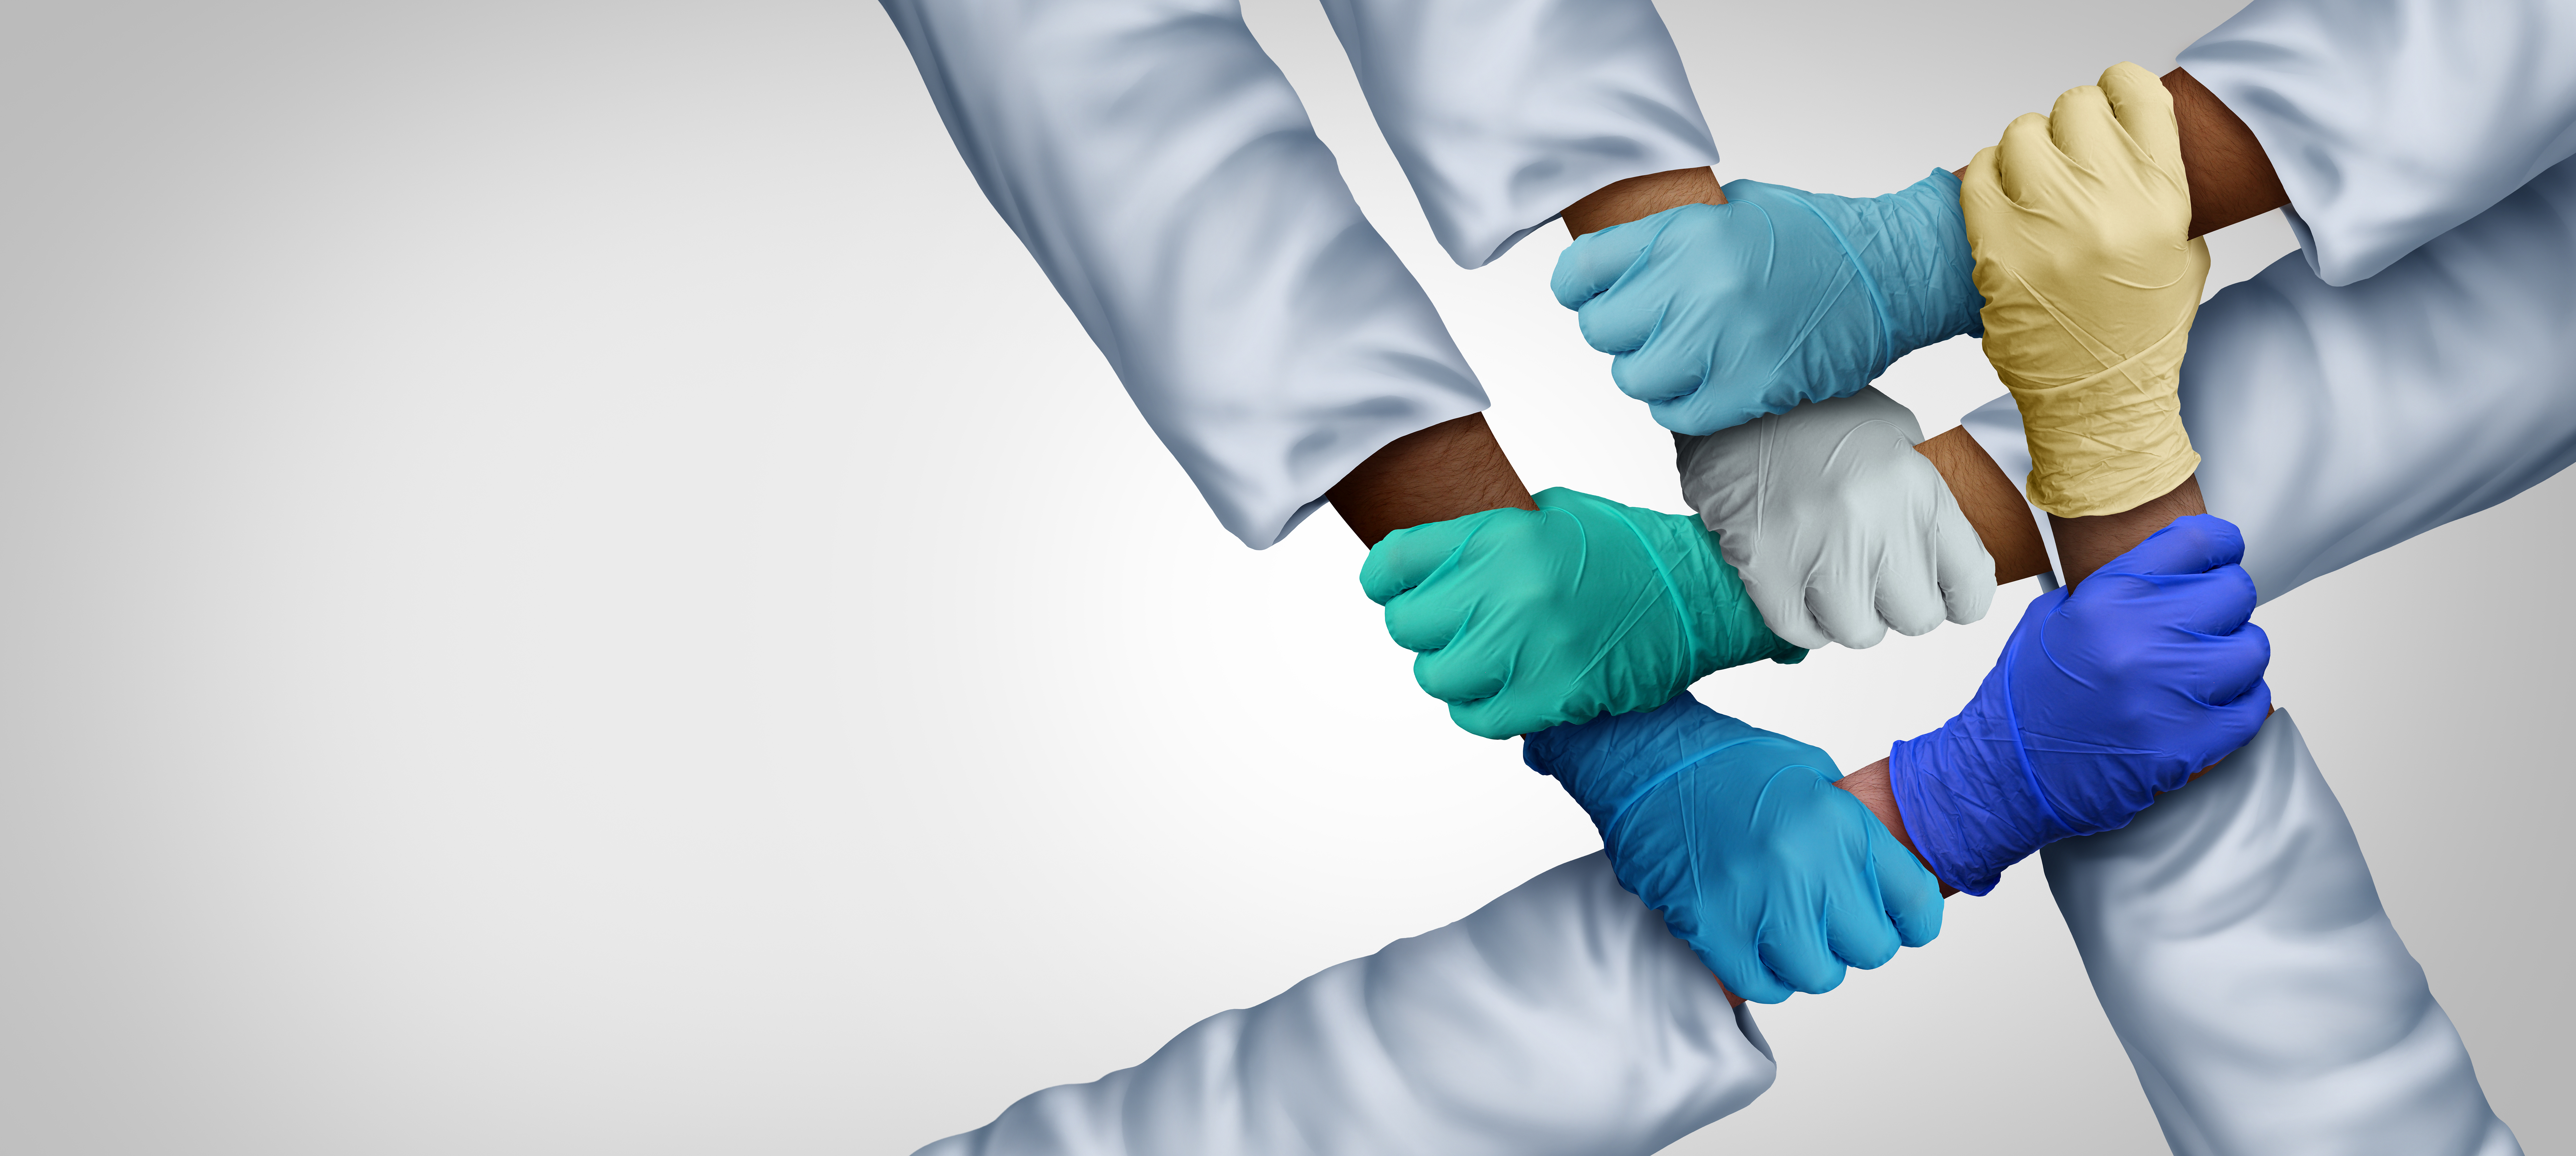 doctors hands with gloves